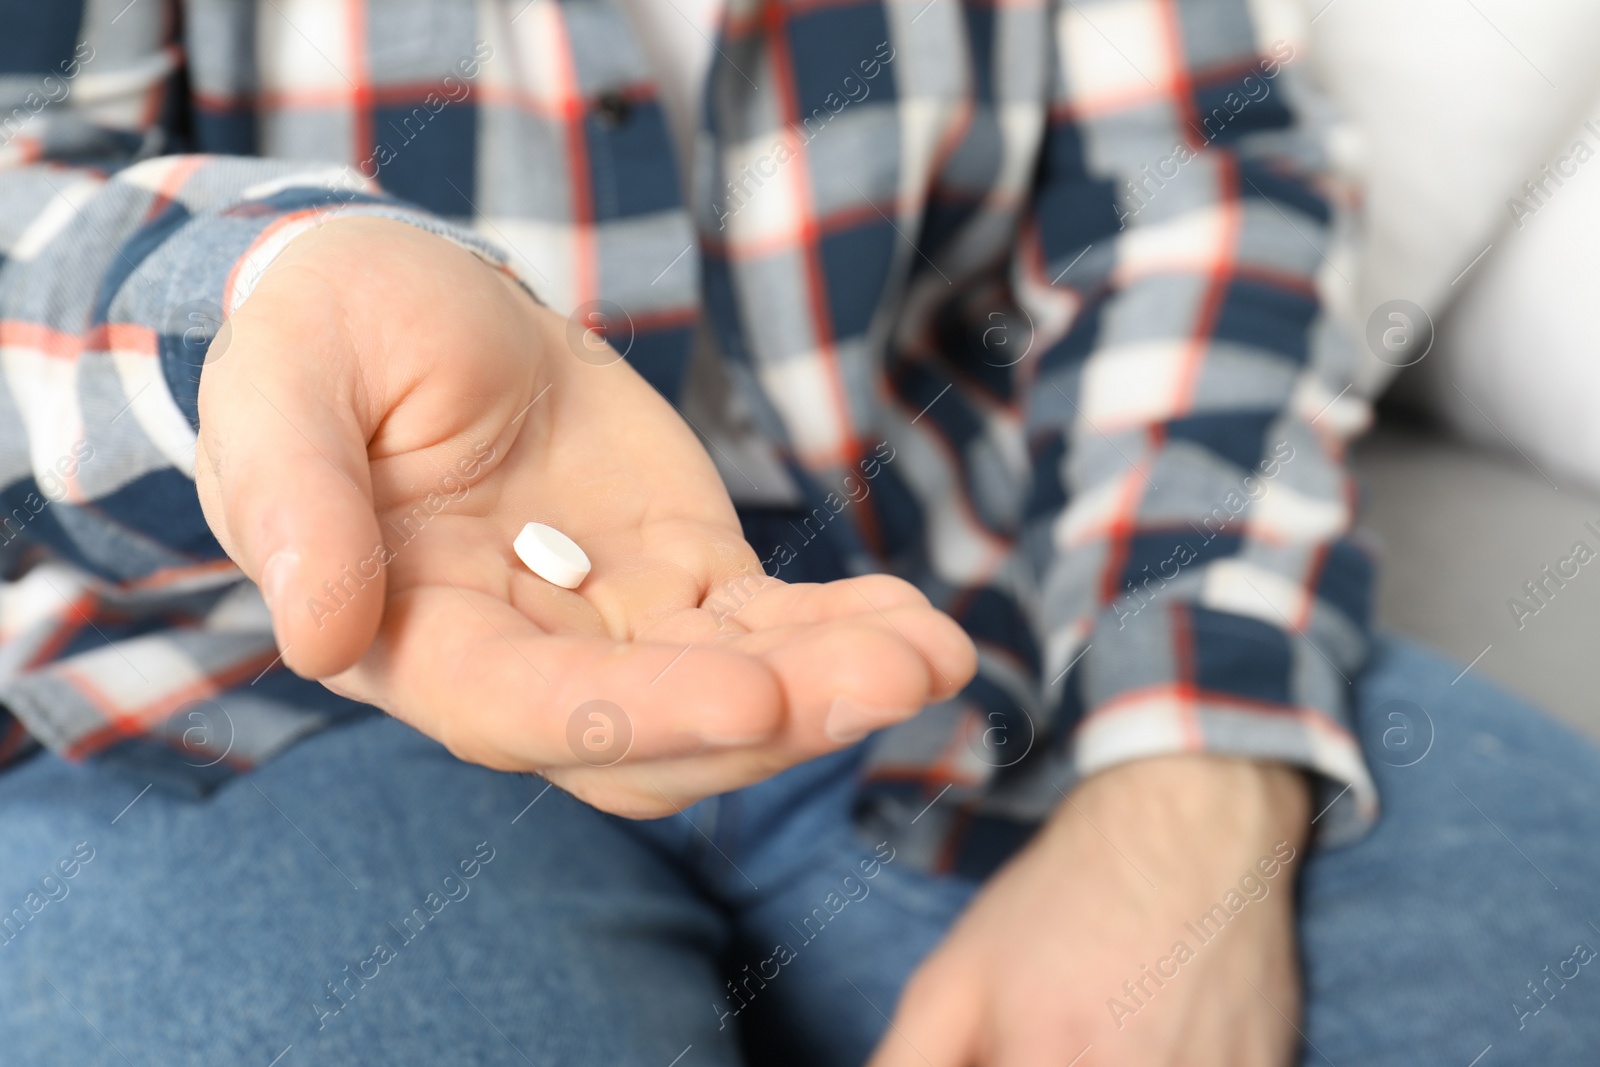 Photo of Man holding pill in hand, closeup view. Health care